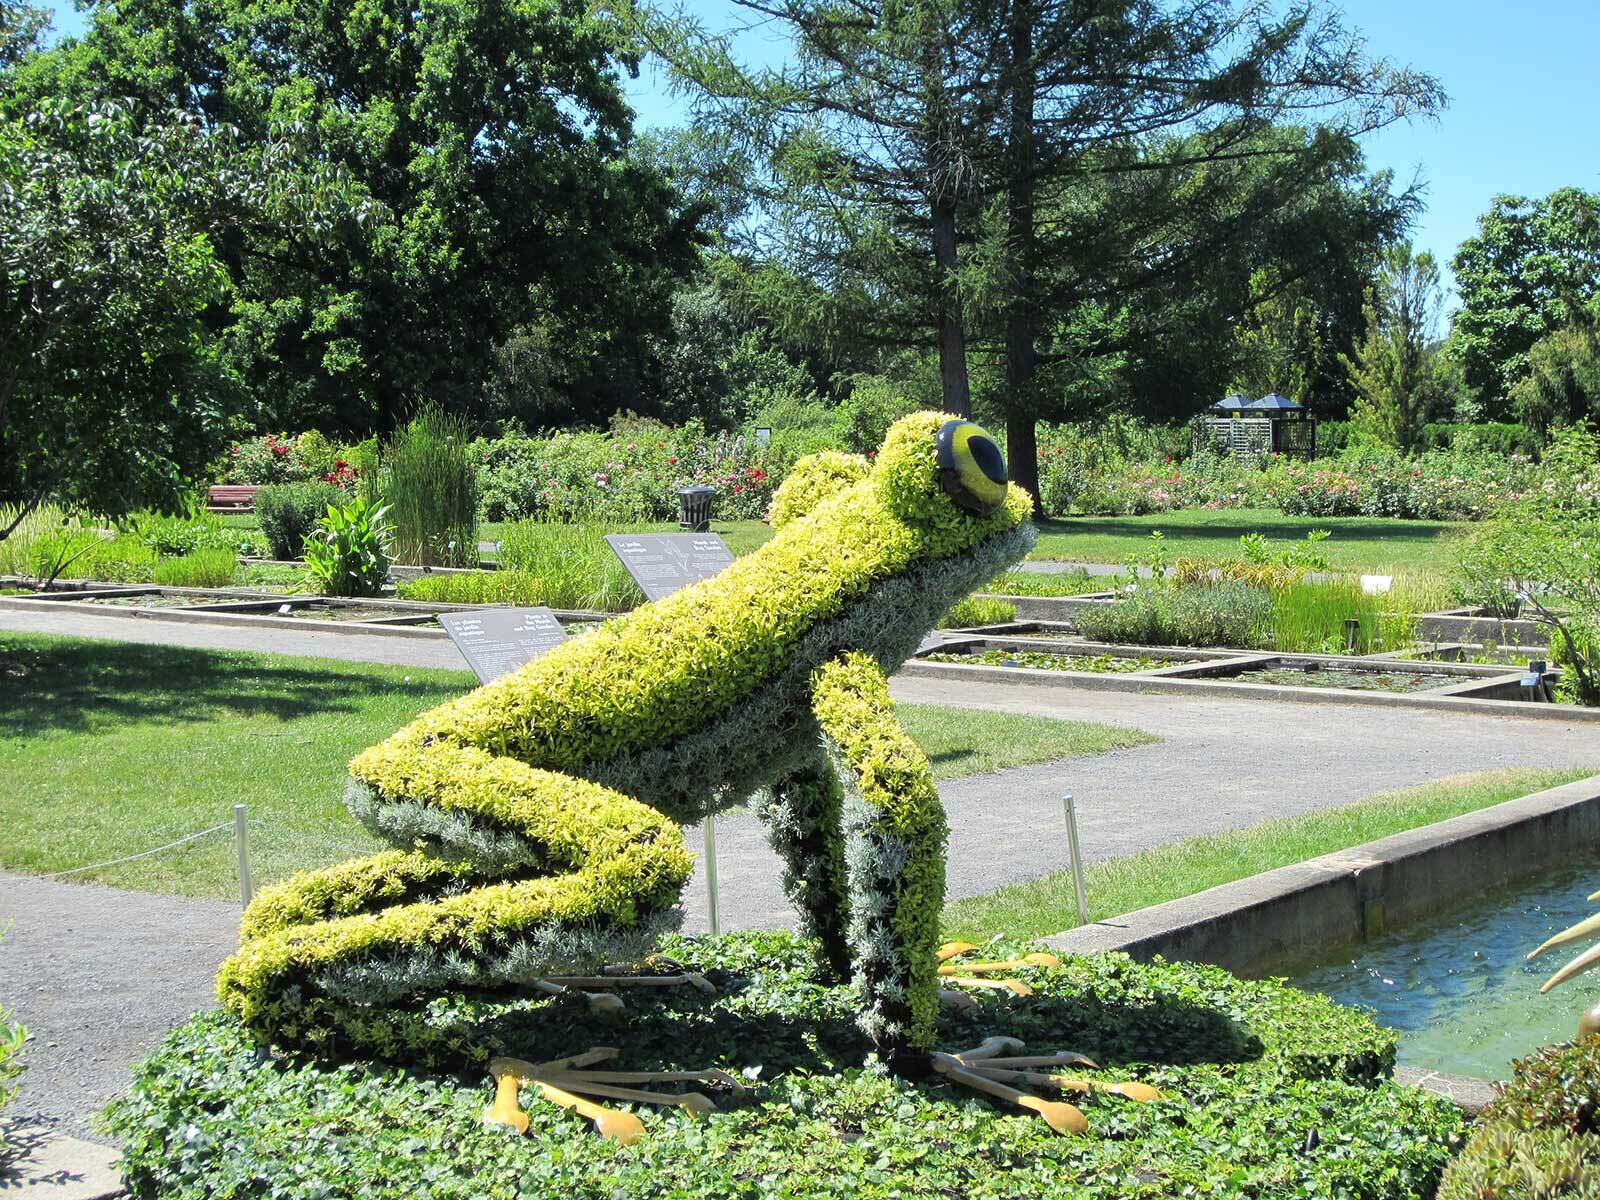 Frog mosaicultures internationales montreal botaical gardens 2013